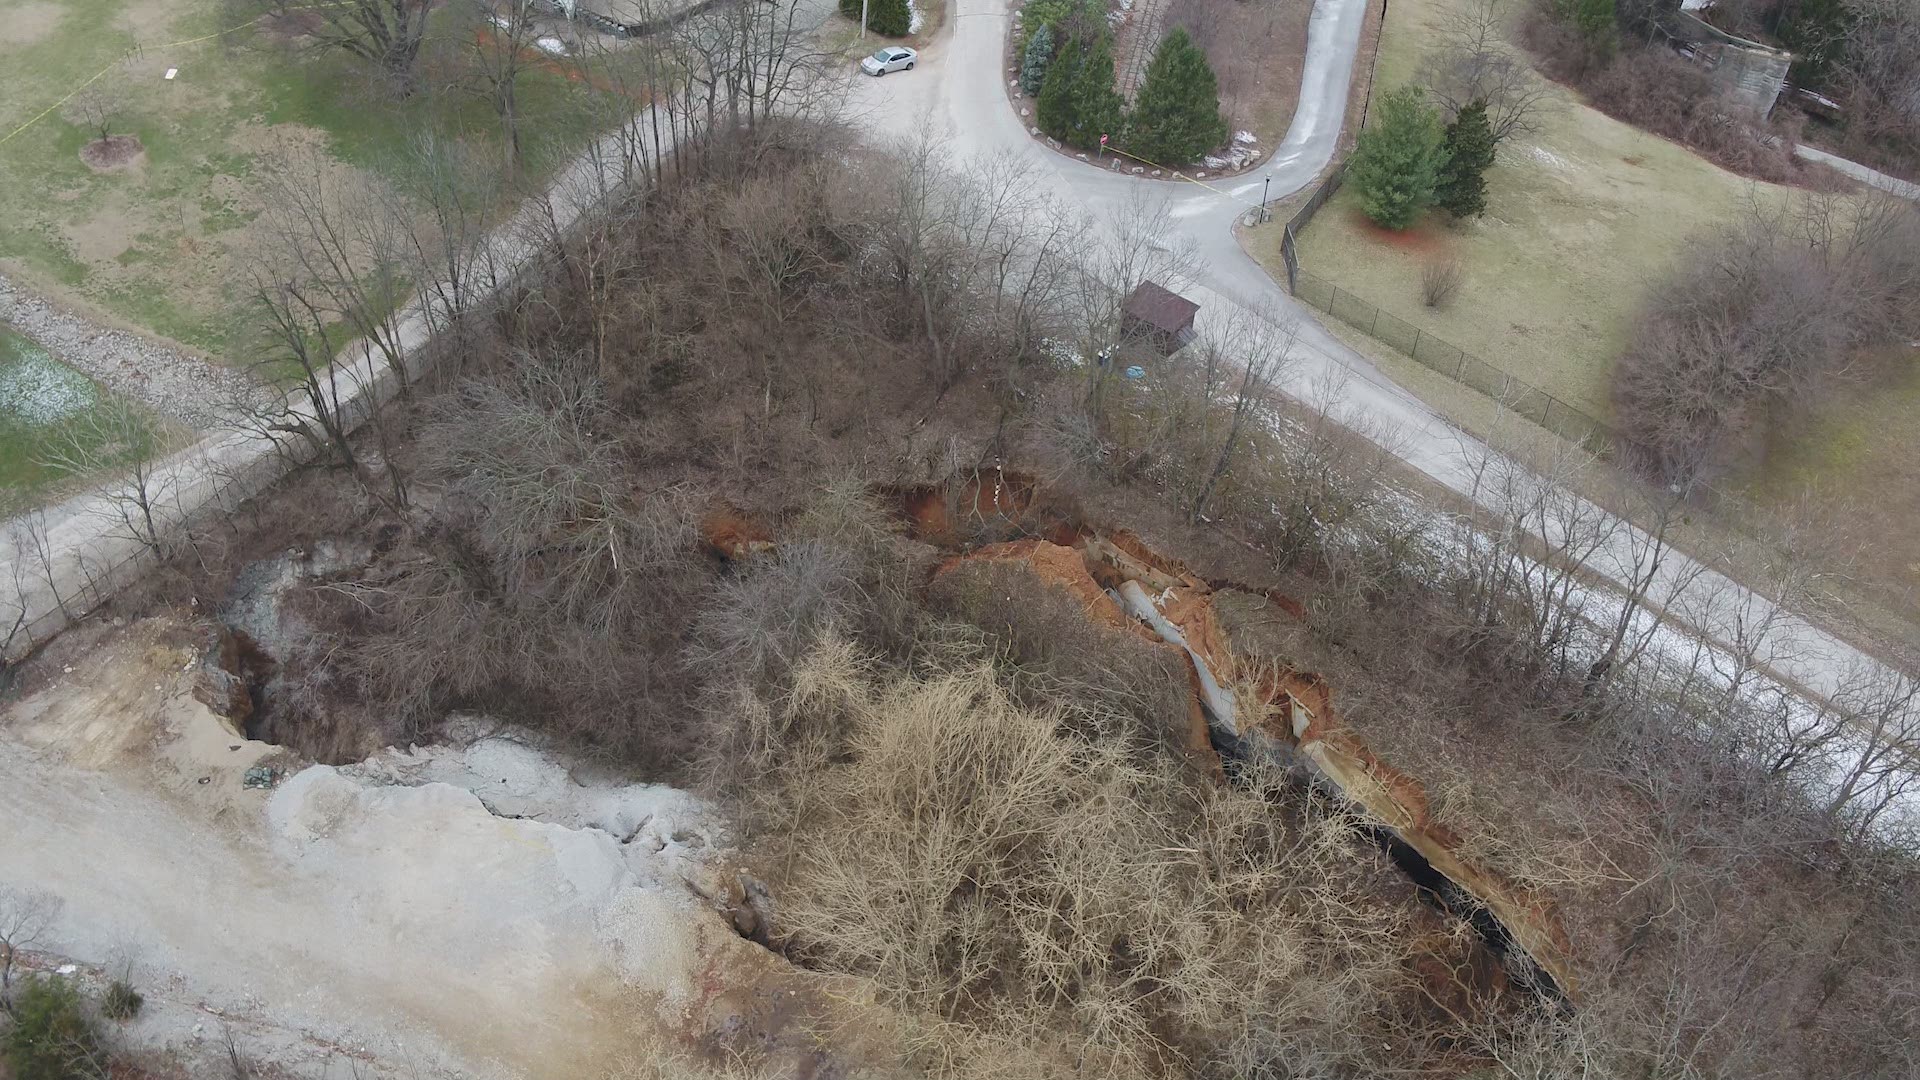 The sinkhole opened on March 6, causing the Louisville Zoo and the Mega Caverns to temporarily close. No animals, employees, or guests were harmed when the sinkhole opened.